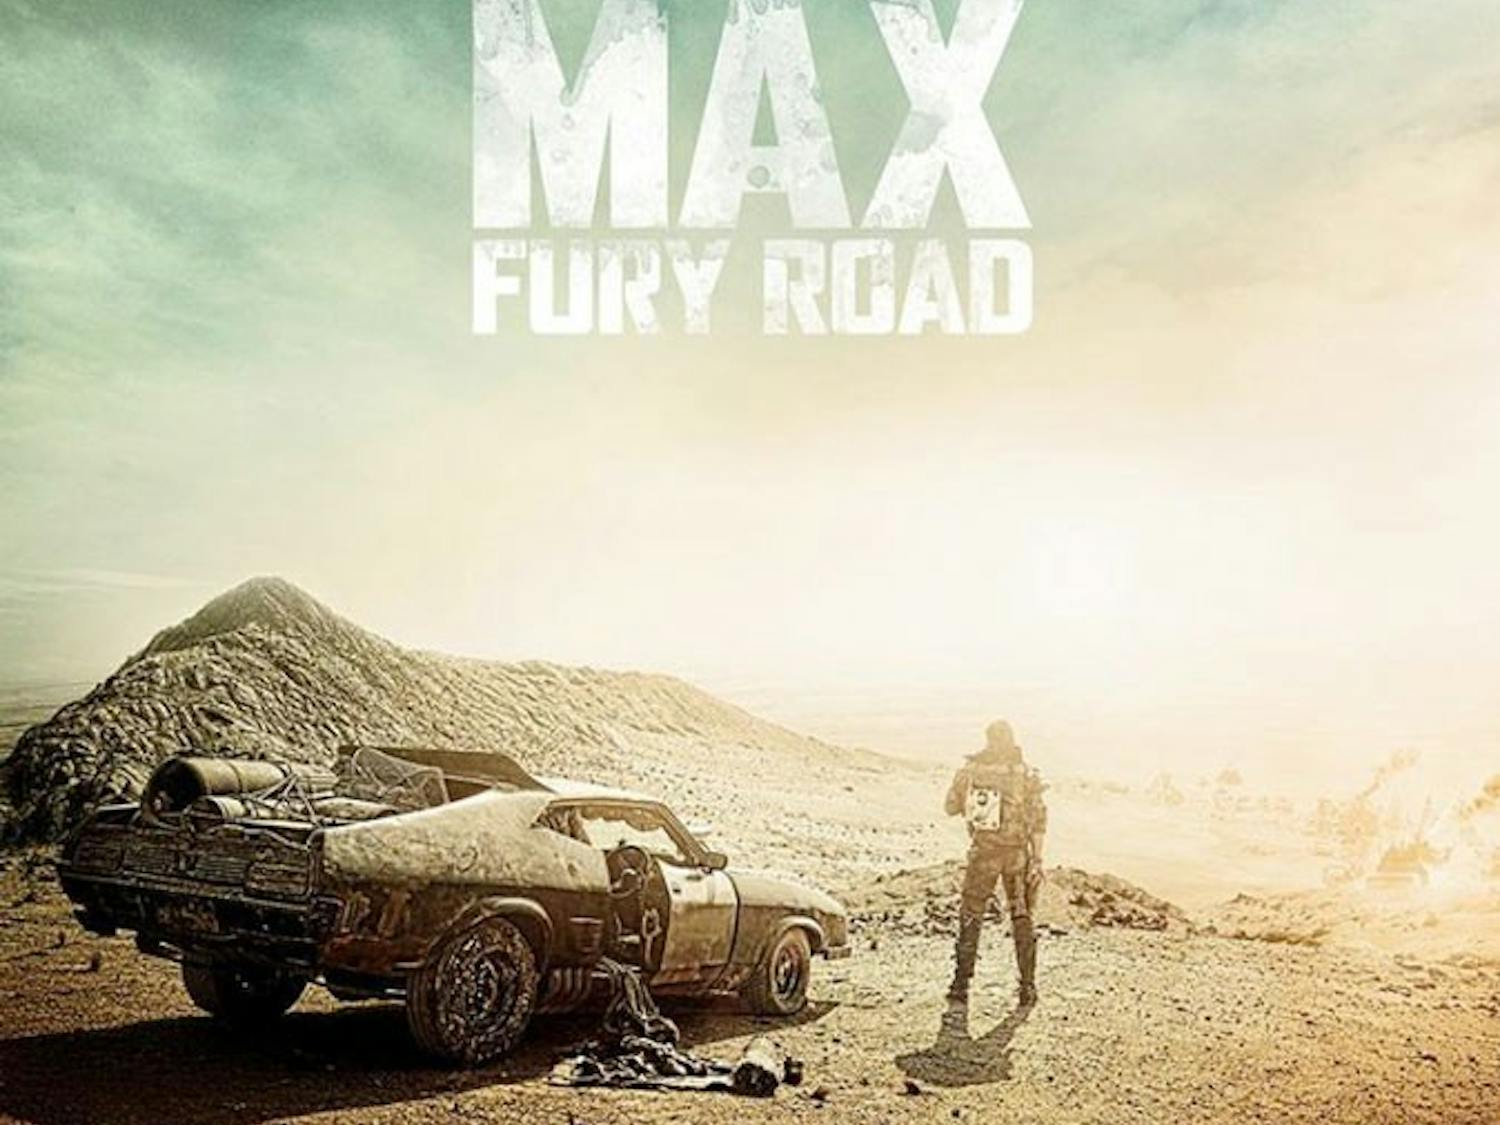 The newest installment of the Mad Max series will be released on May 15. Since the initial release in 1979, Mad Max has gained a strong underground cult-like following, and fans of the film series are eagerly anticipating the comeback film.